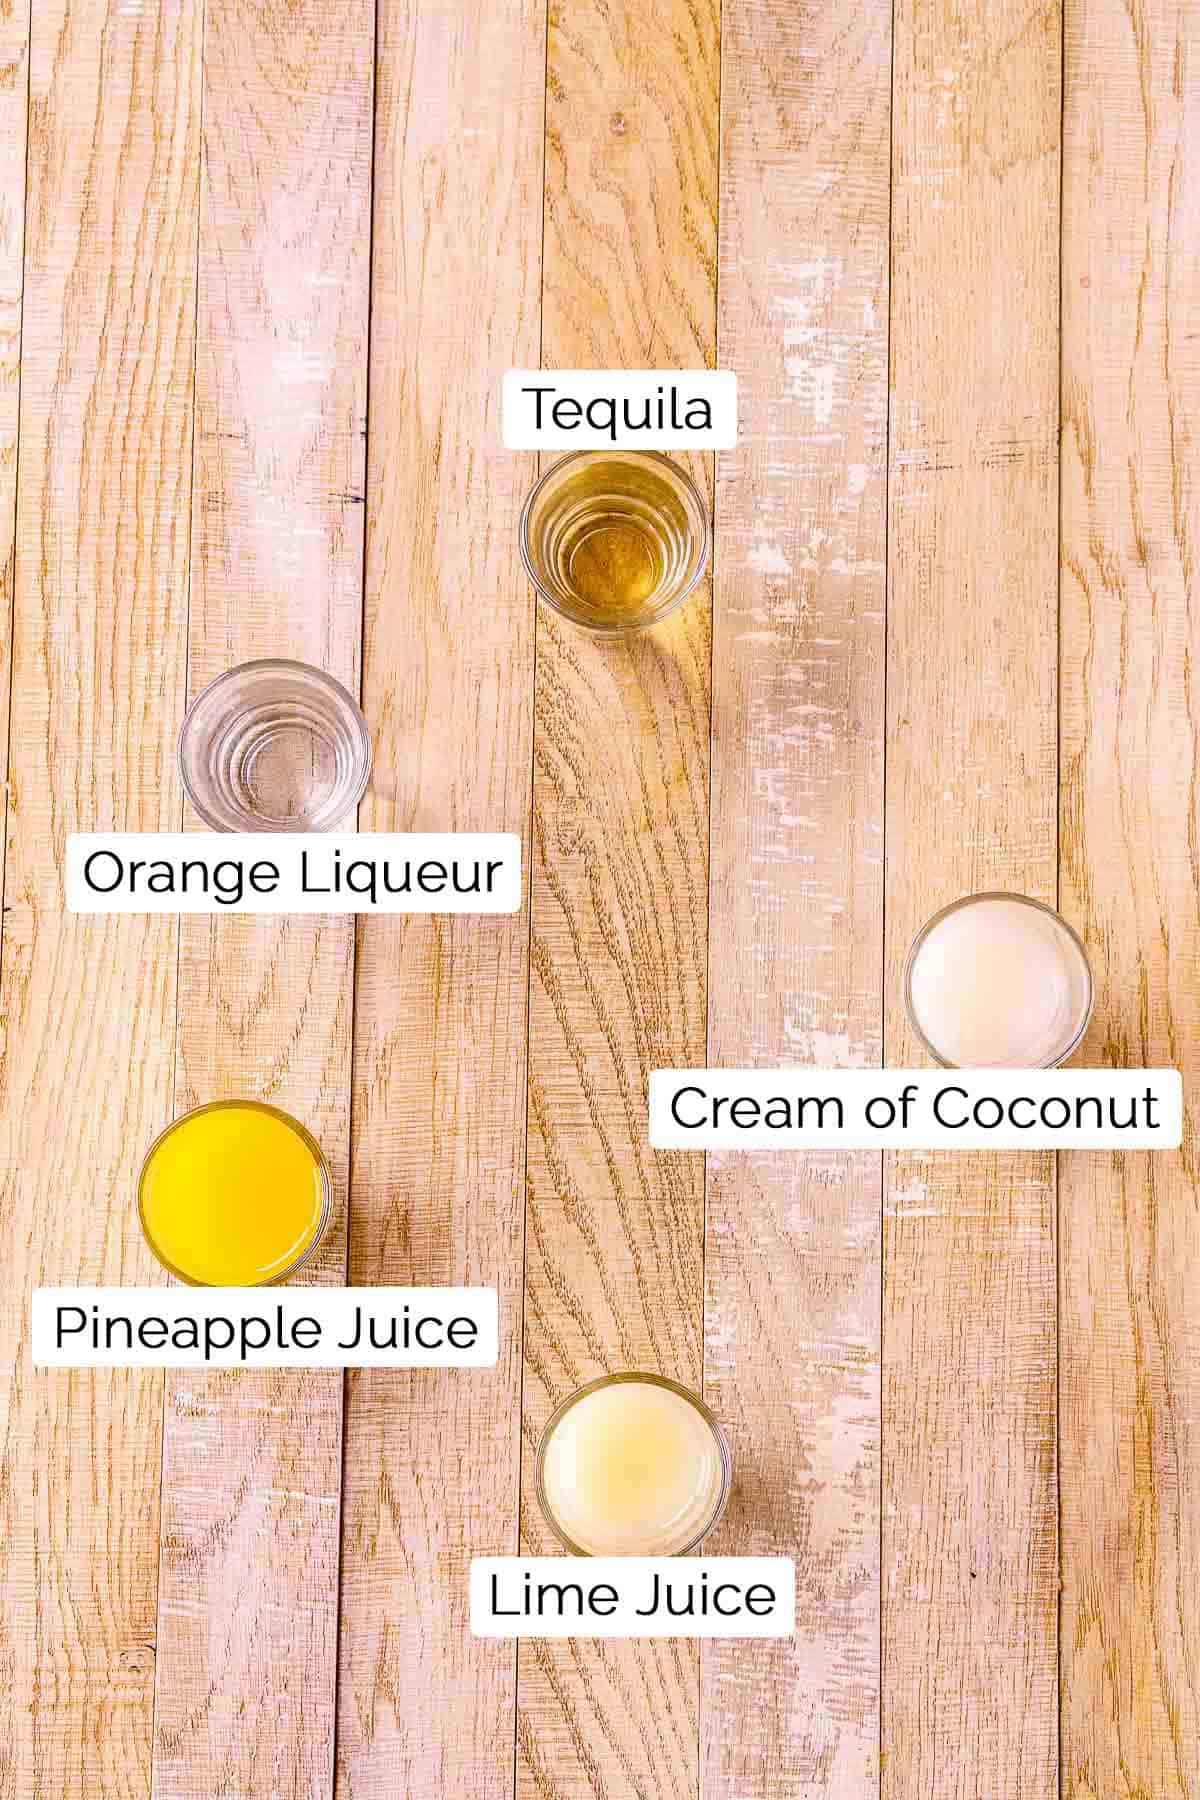 The ingredients with black and white labels on a cream-colored wooden surface.